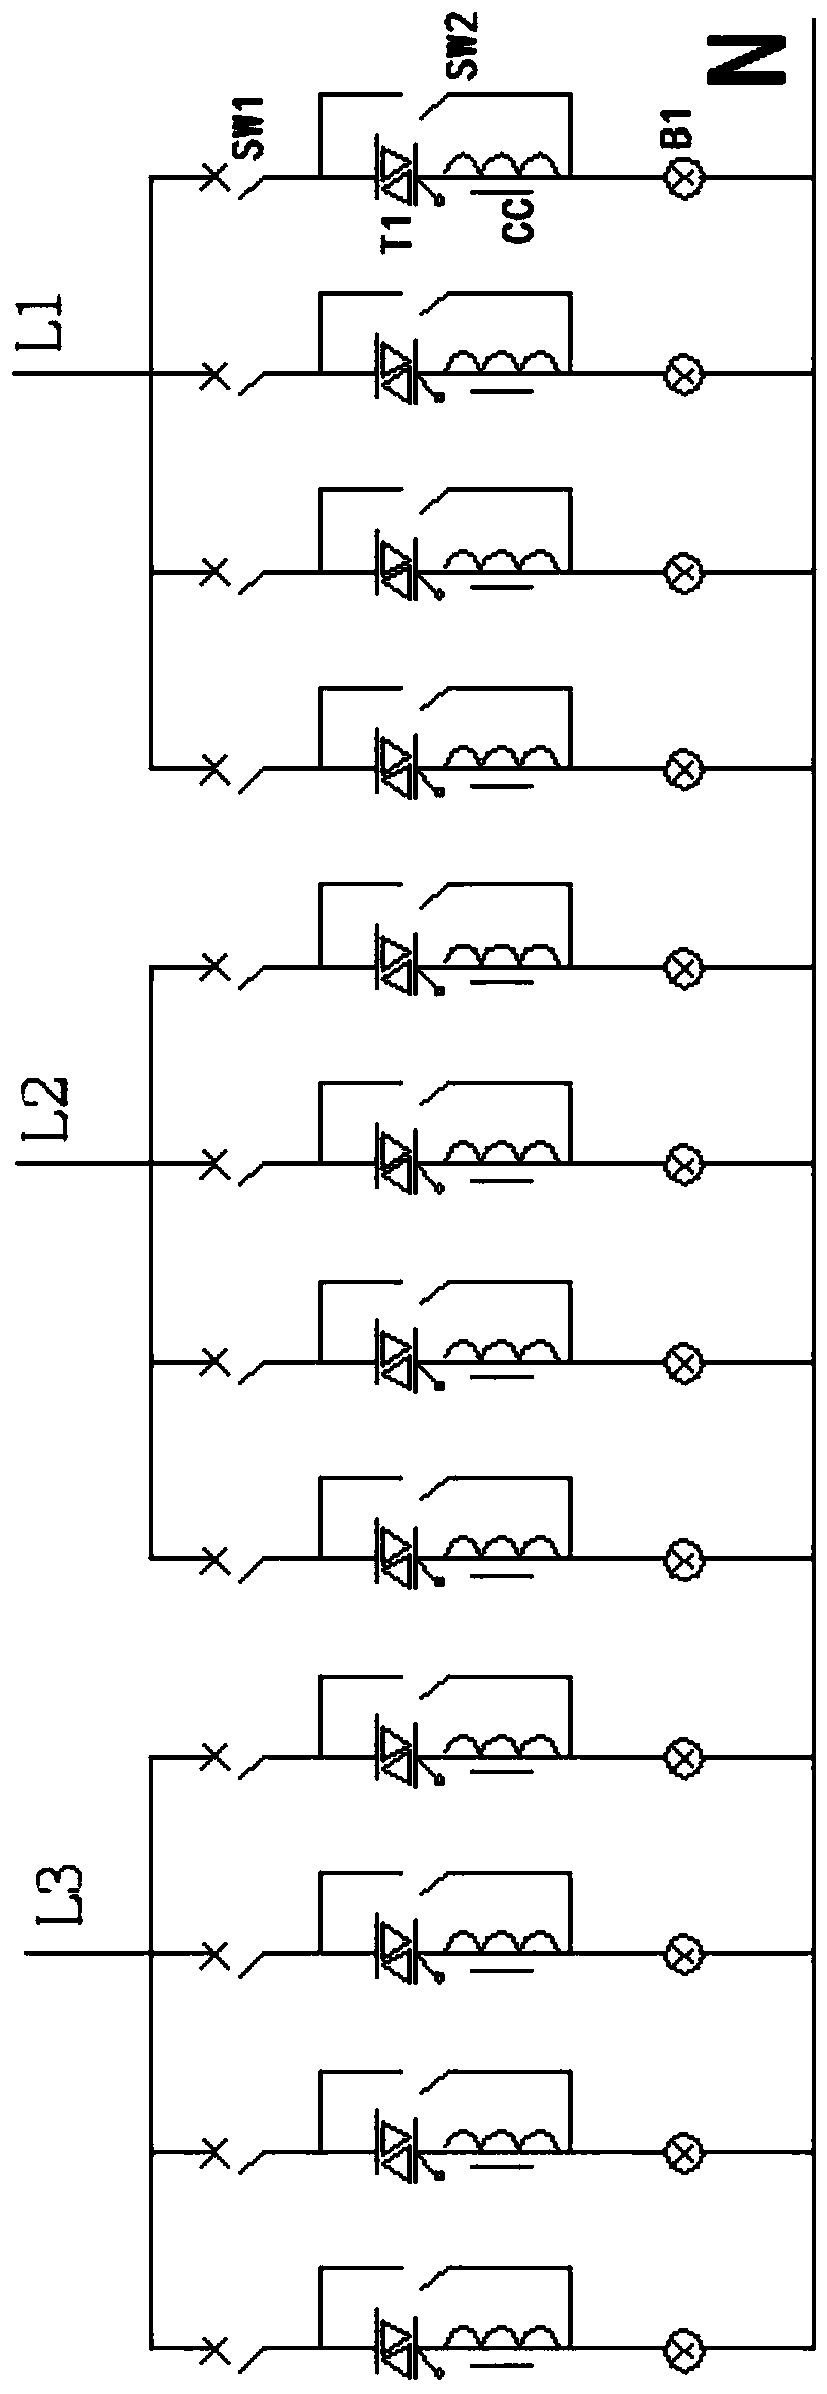 An intelligent dimming controller suitable for dimming in large-area spaces